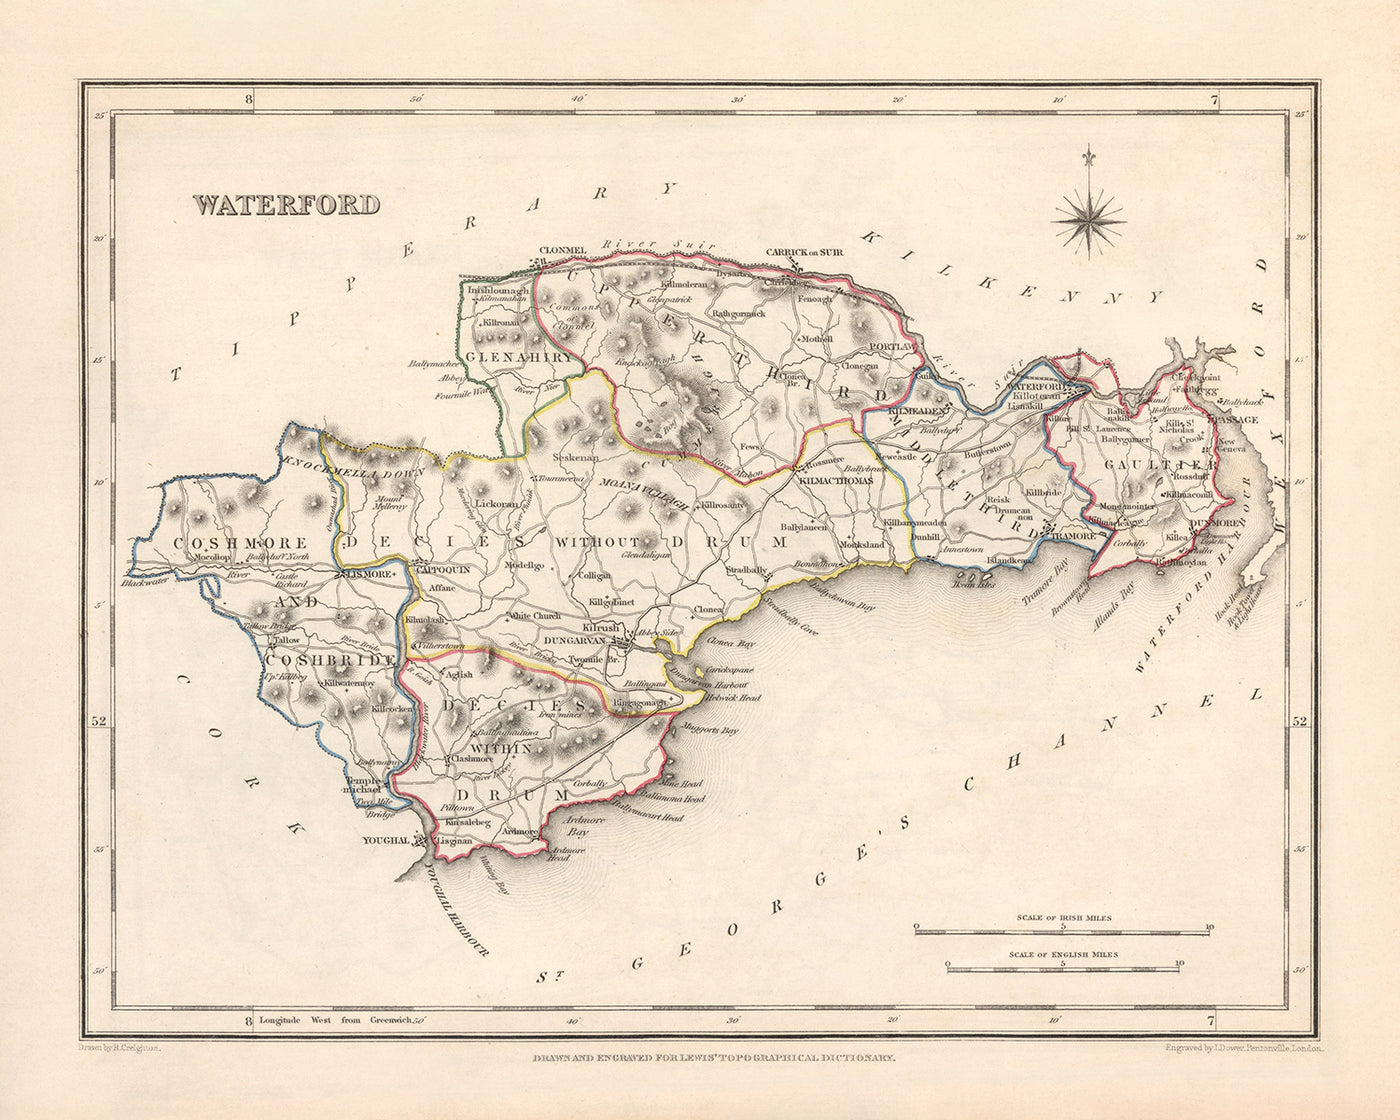 Old Map of County Waterford by Samuel Lewis, 1844: Dungarvan, Lismore, Cappoquin, Tramore, Dunmore East